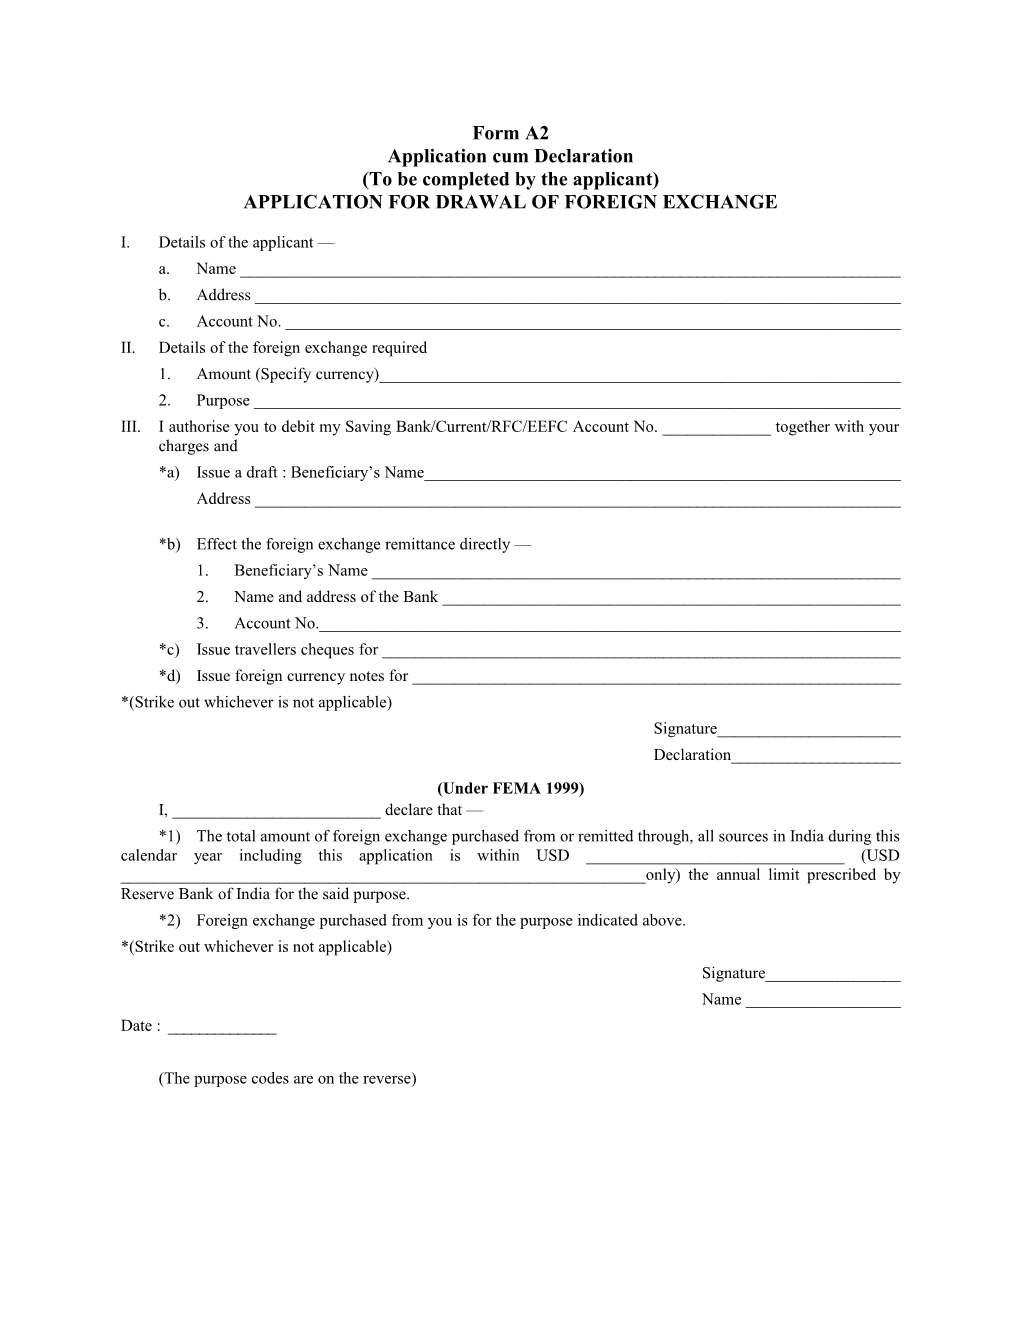 Application for Drawal of Foreign Exchange